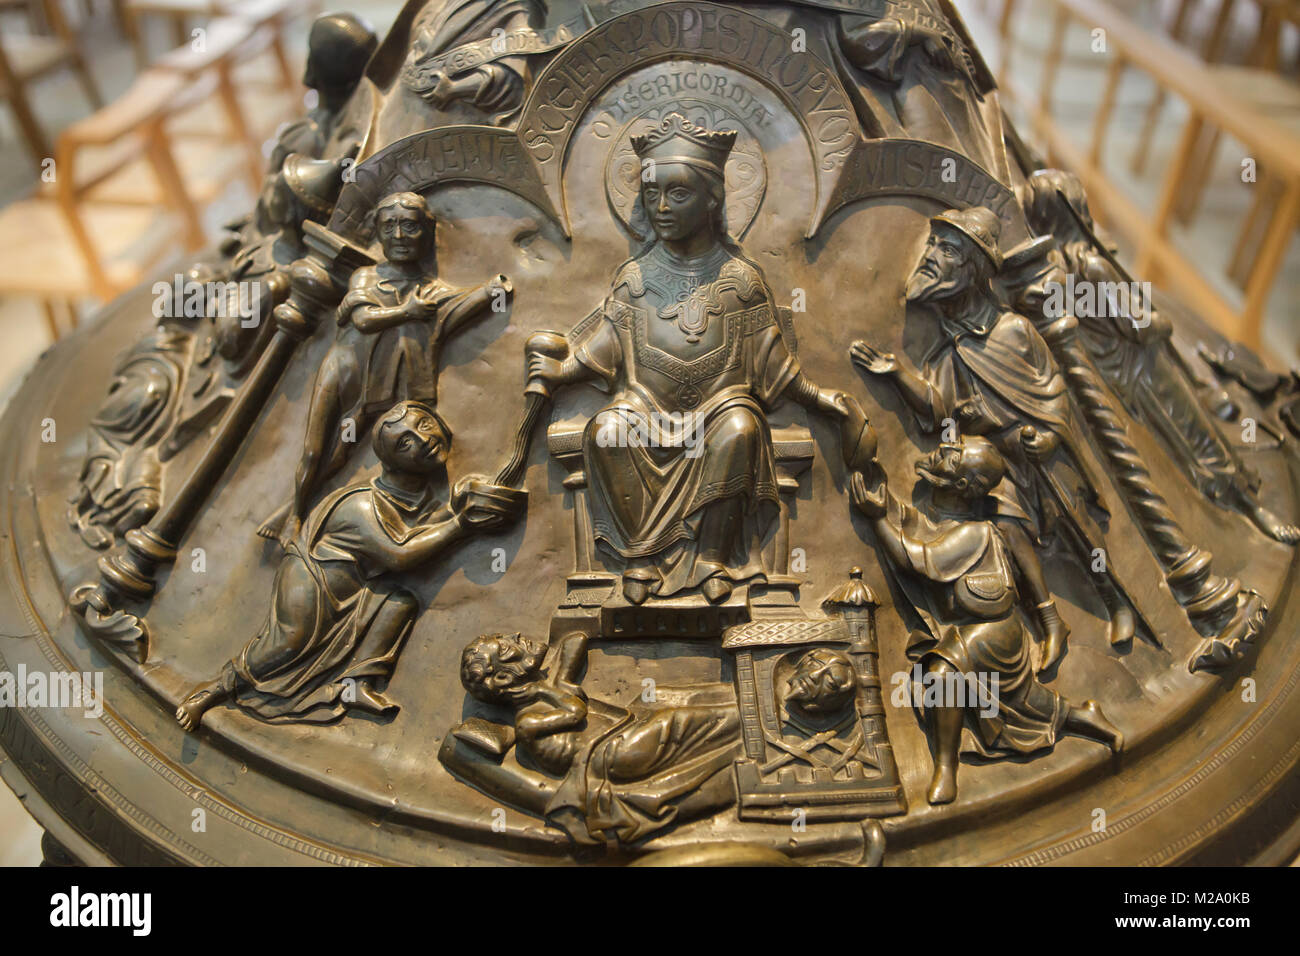 Personification of Mercy. Romanesque relief on the cover of the bronze baptismal font (Bronzetaufe) from the 11th century in the Hildesheim Cathedral (Hildesheimer Dom) in Hildesheim in Lower Saxony, Germany. Stock Photo